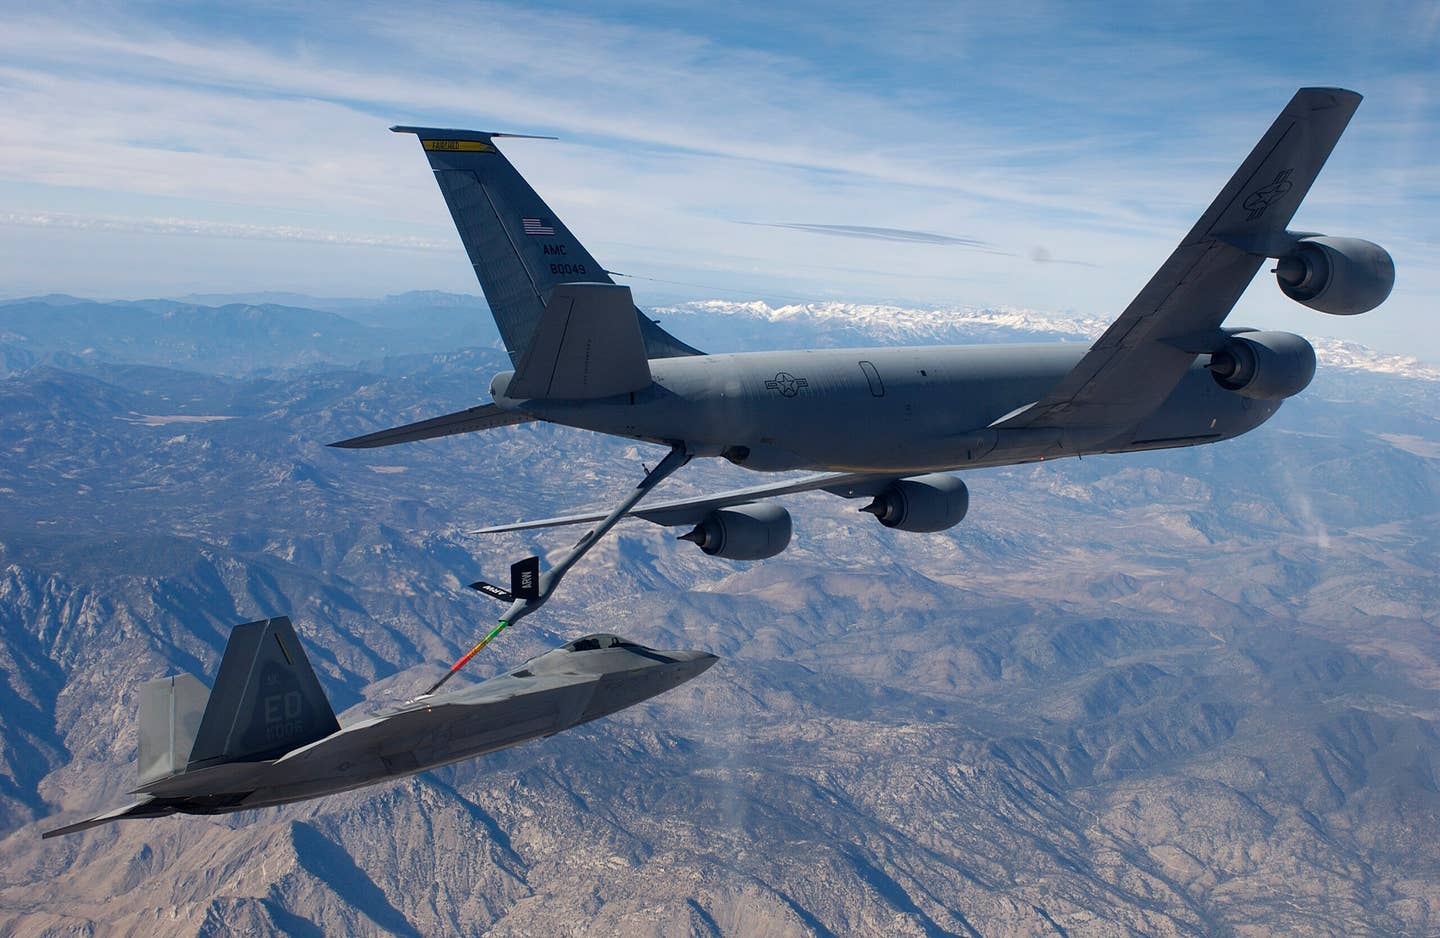 The Air Force F-22 Raptor and the KC-135 Stratotanker refueling it are both on the list of aircraft the GAO has found are increasingly unable to fly. (Photo by Joe McNally/Getty Images)